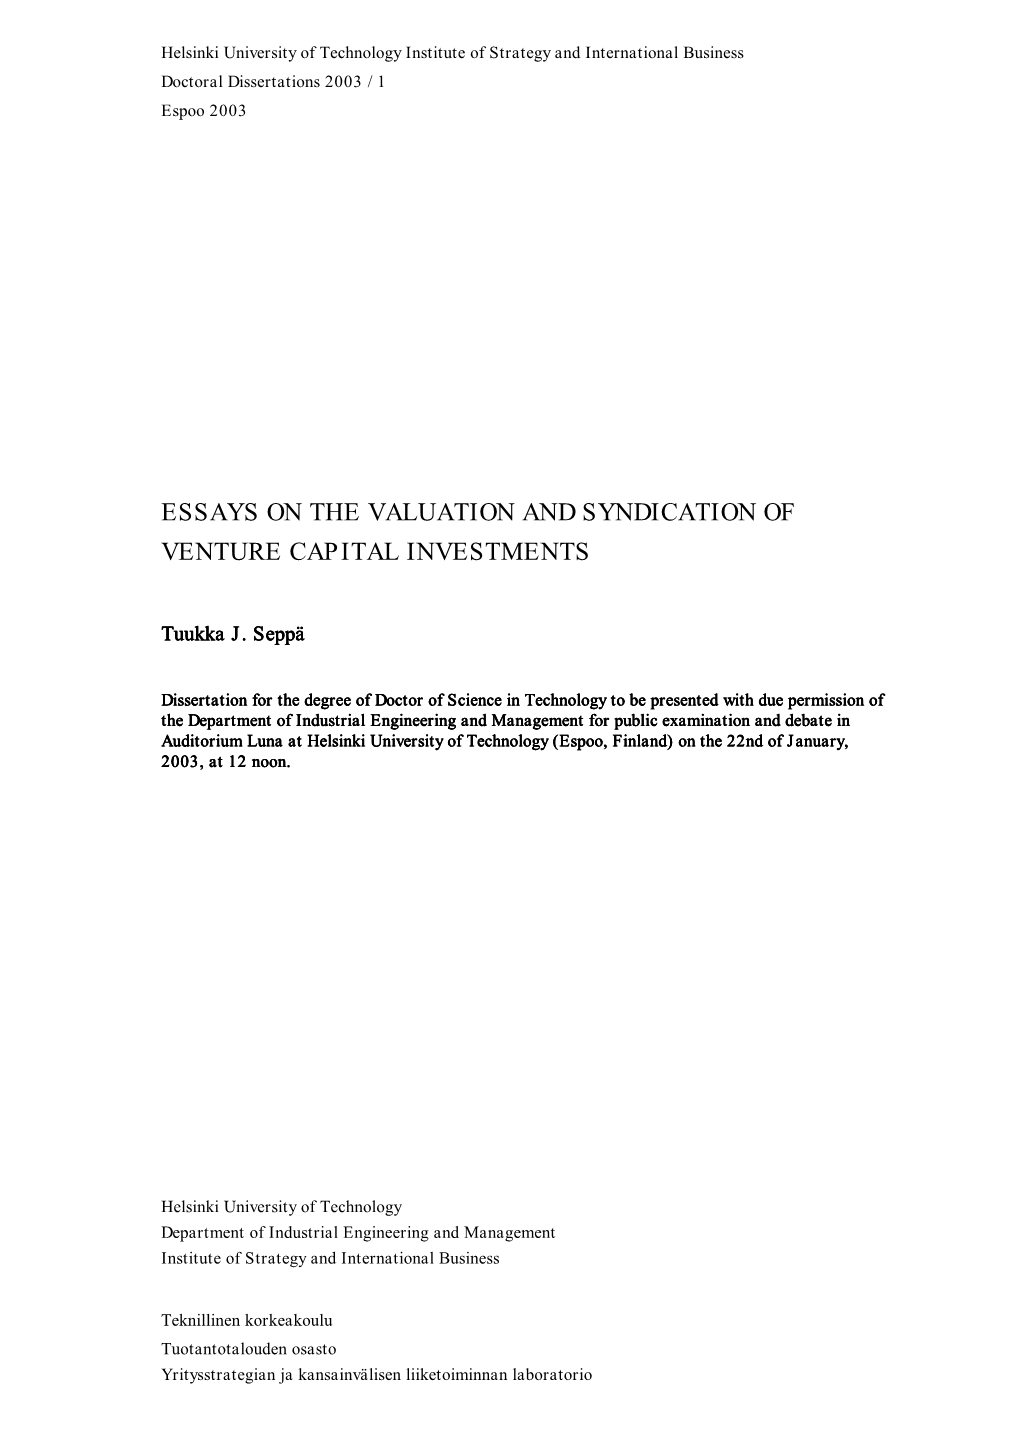 Essays on the Valuation and Syndication of Venture Capital Investments